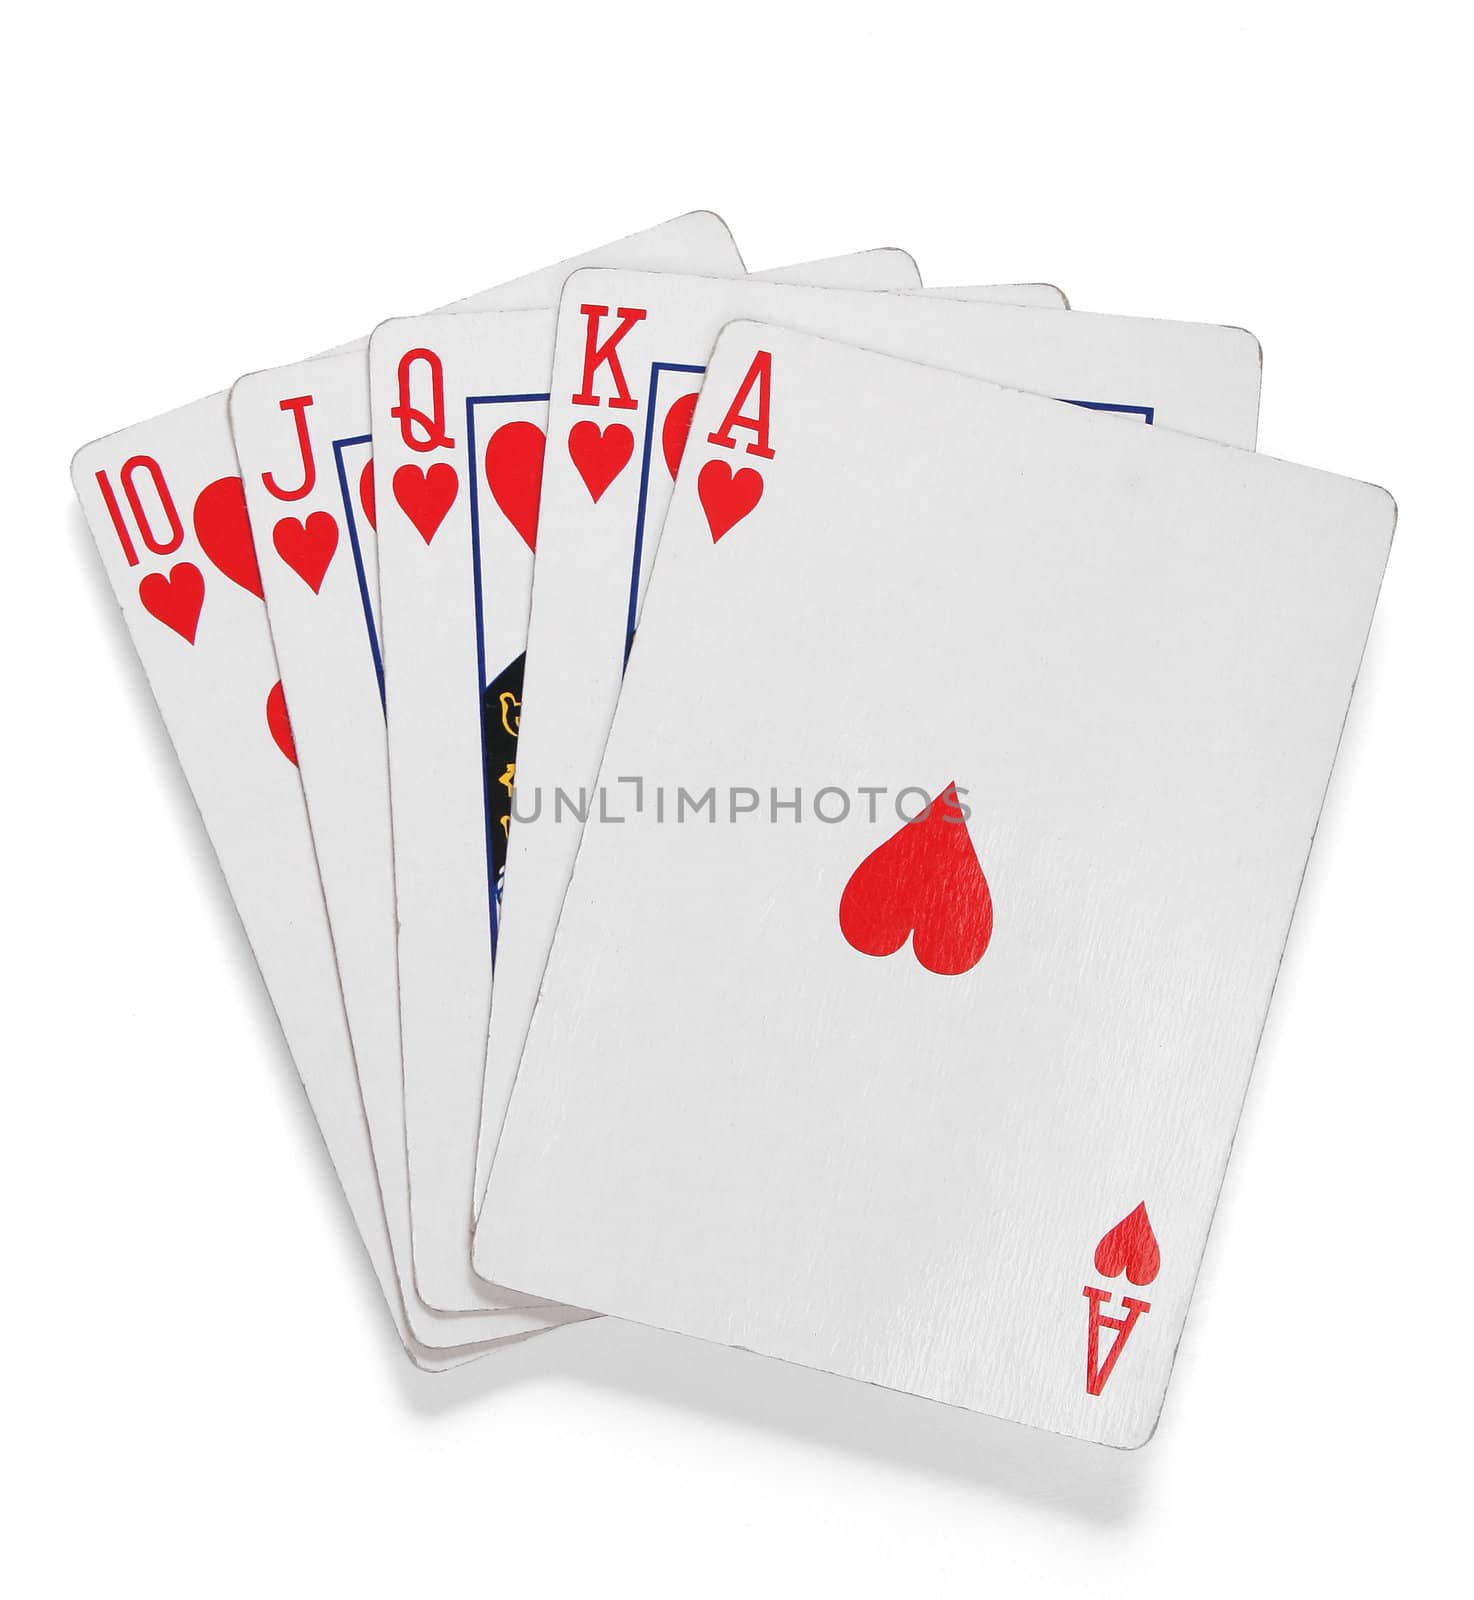 Royal Flush hand with clipping path